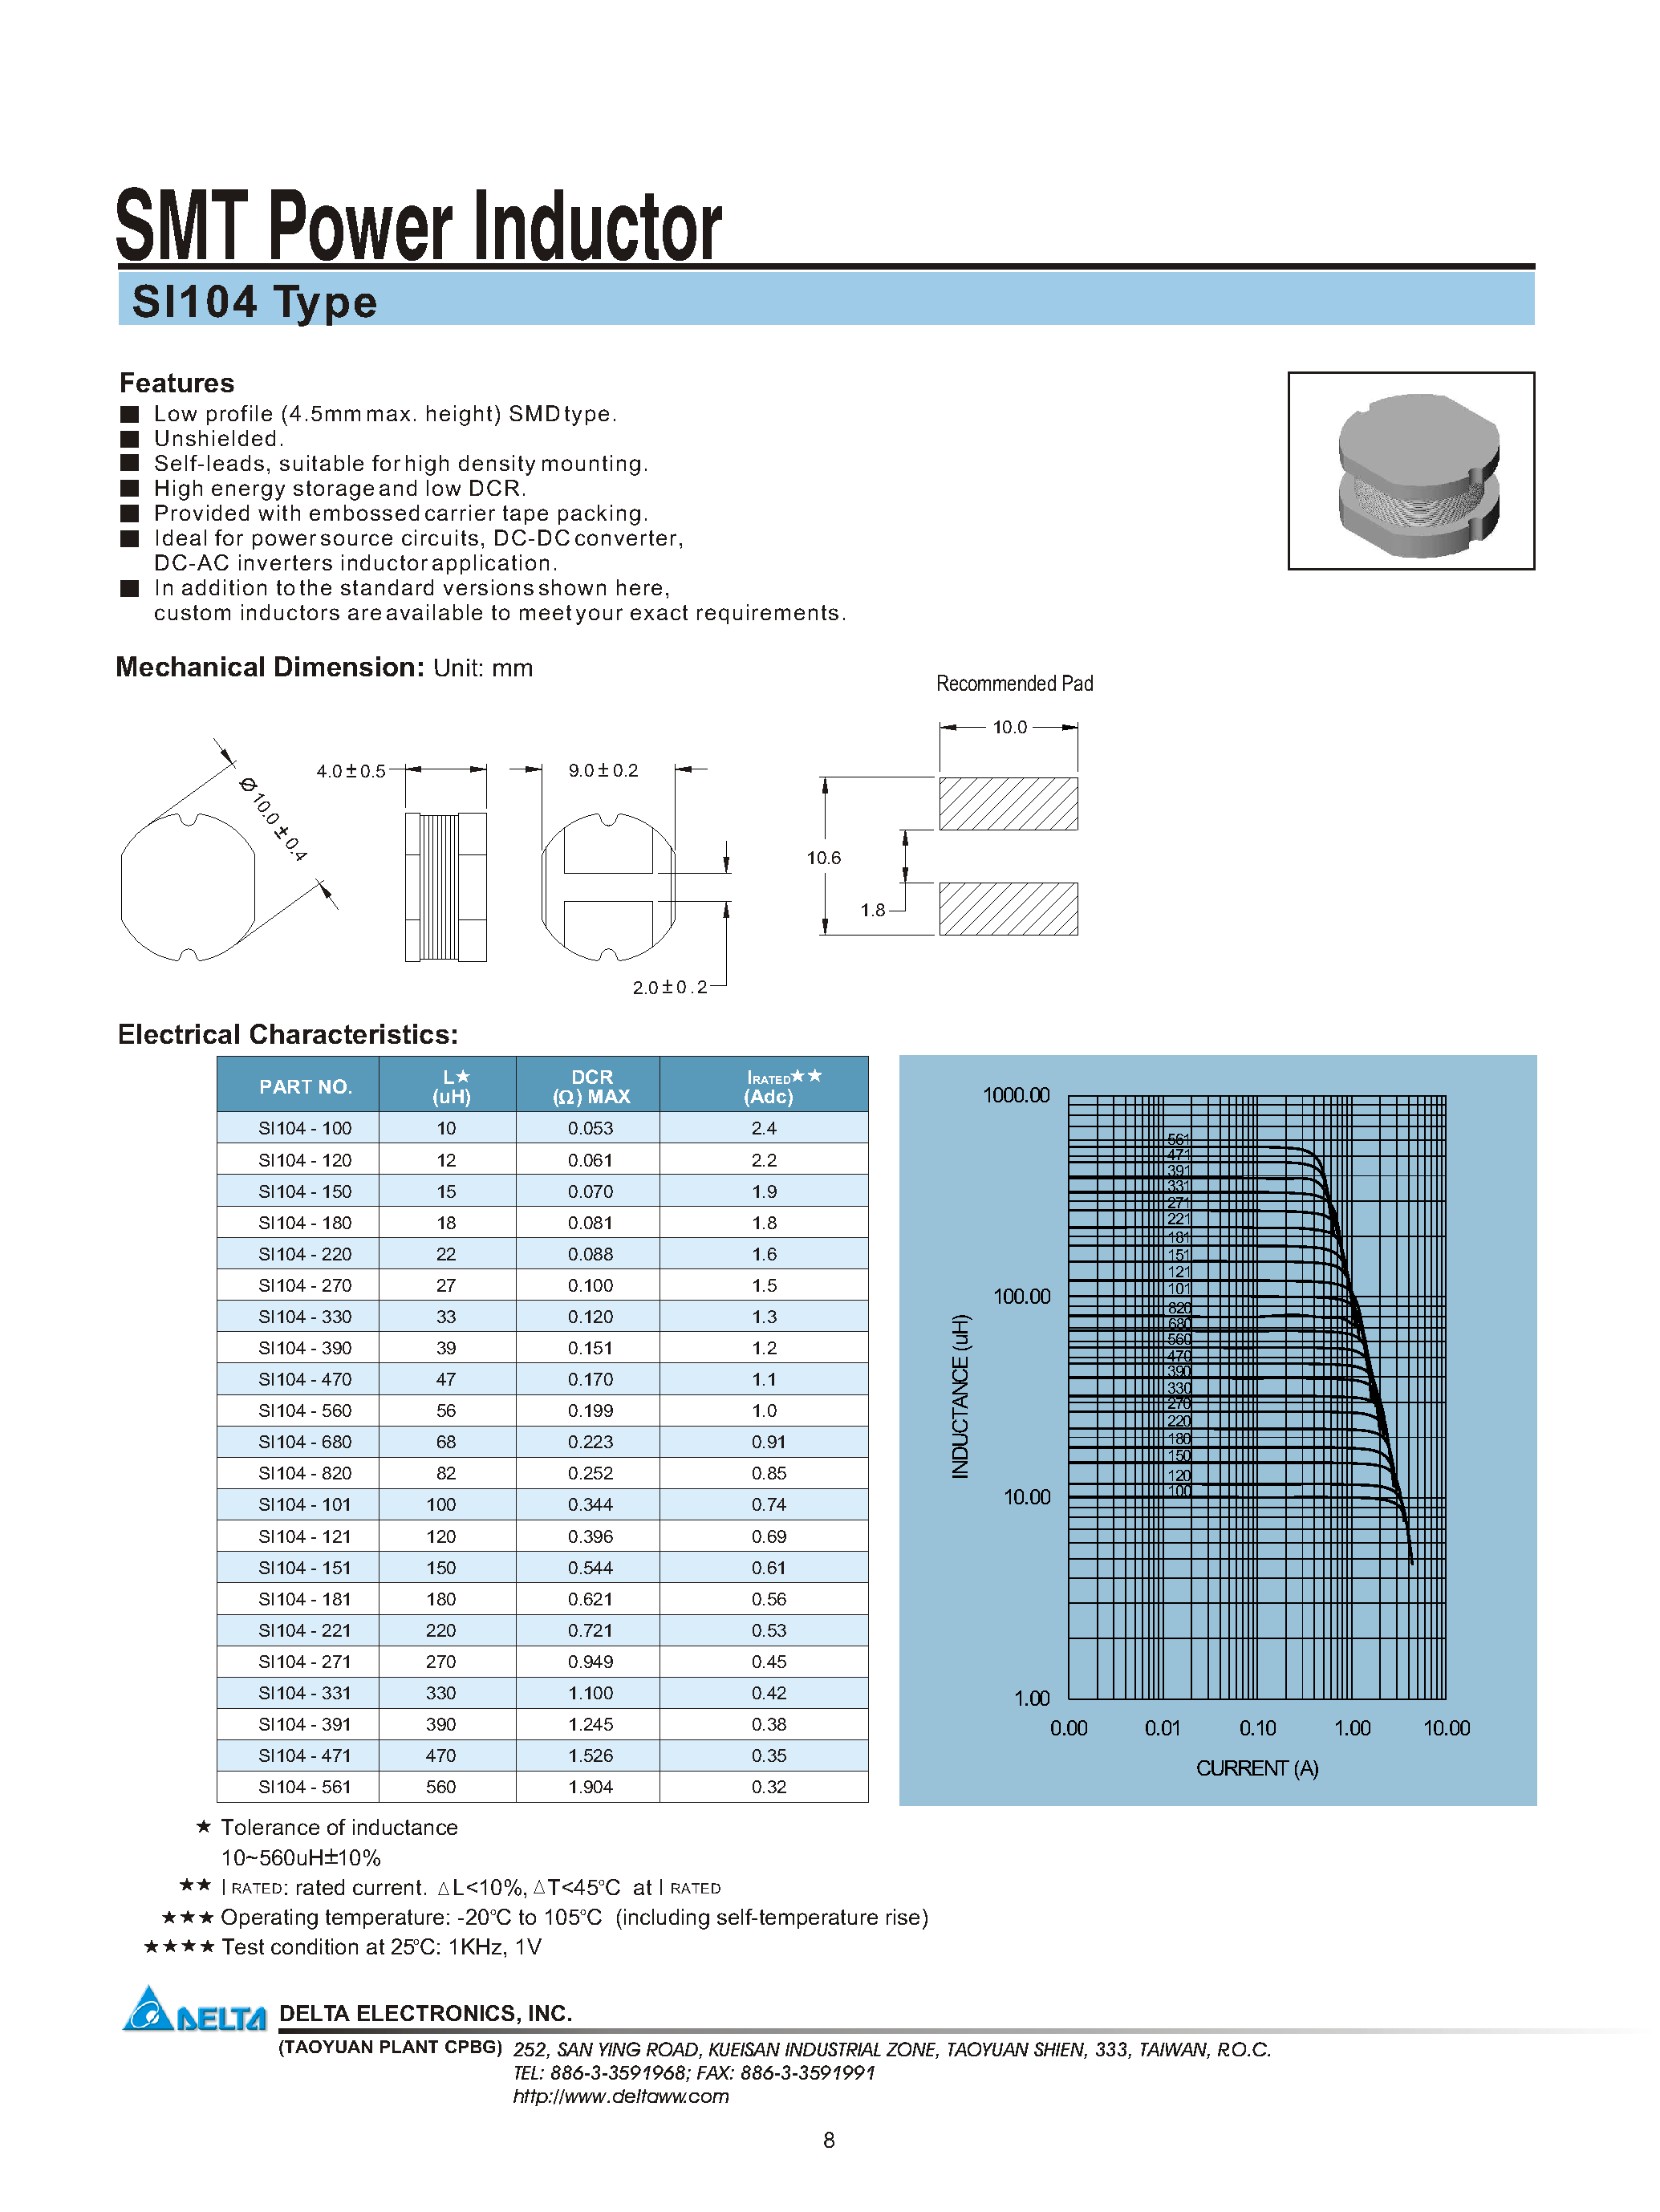 Datasheet SI104-121 - SMT Power Inductor page 1